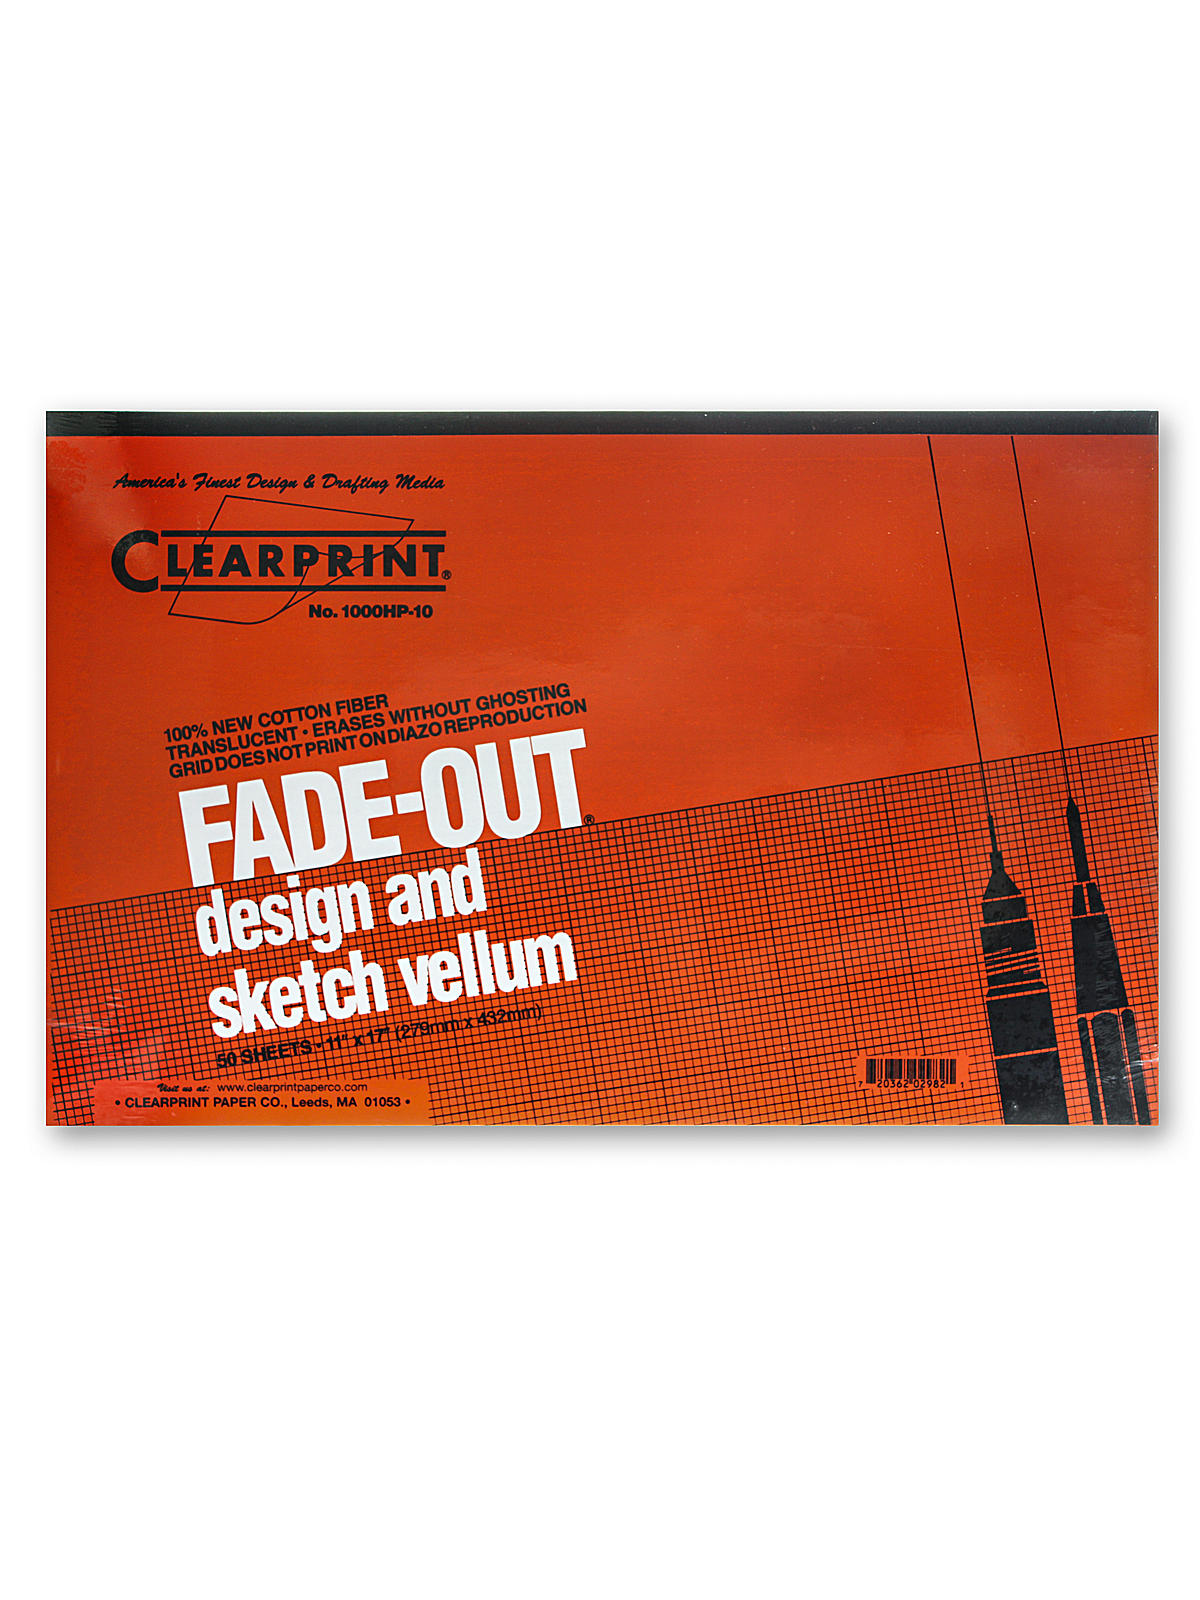 Fade-out Design And Sketch Vellum - Grid Pad 10 X 10 11 In. X 17 In. Pad Of 50